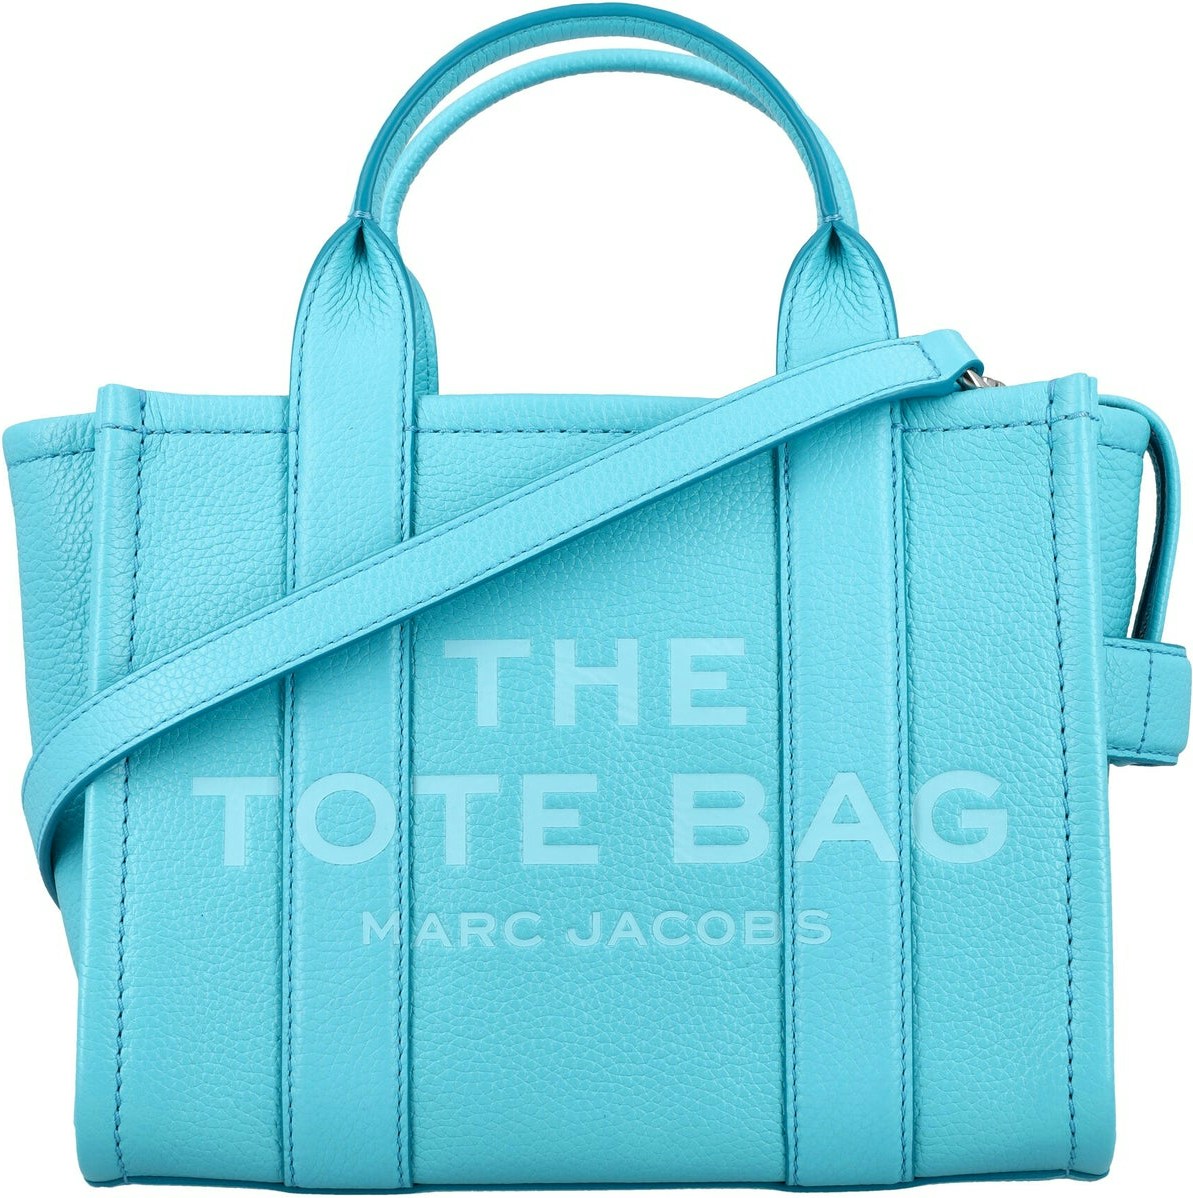 Women's 'the Leather Mini Tote Bag' by Marc Jacobs